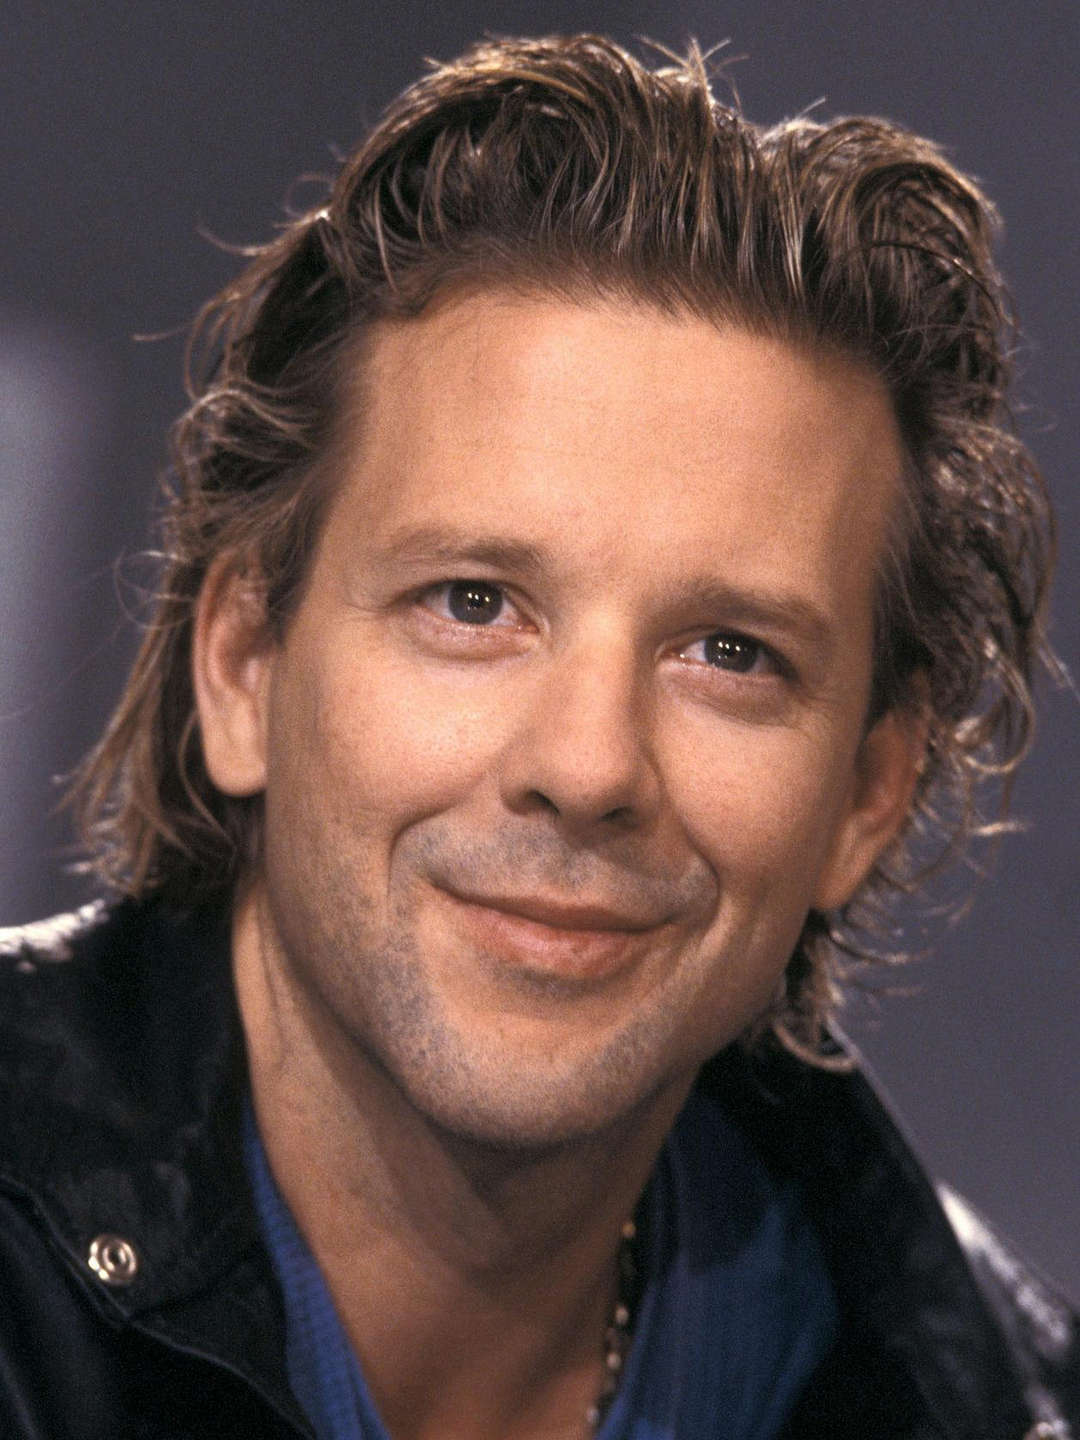 Mickey Rourke way to fame